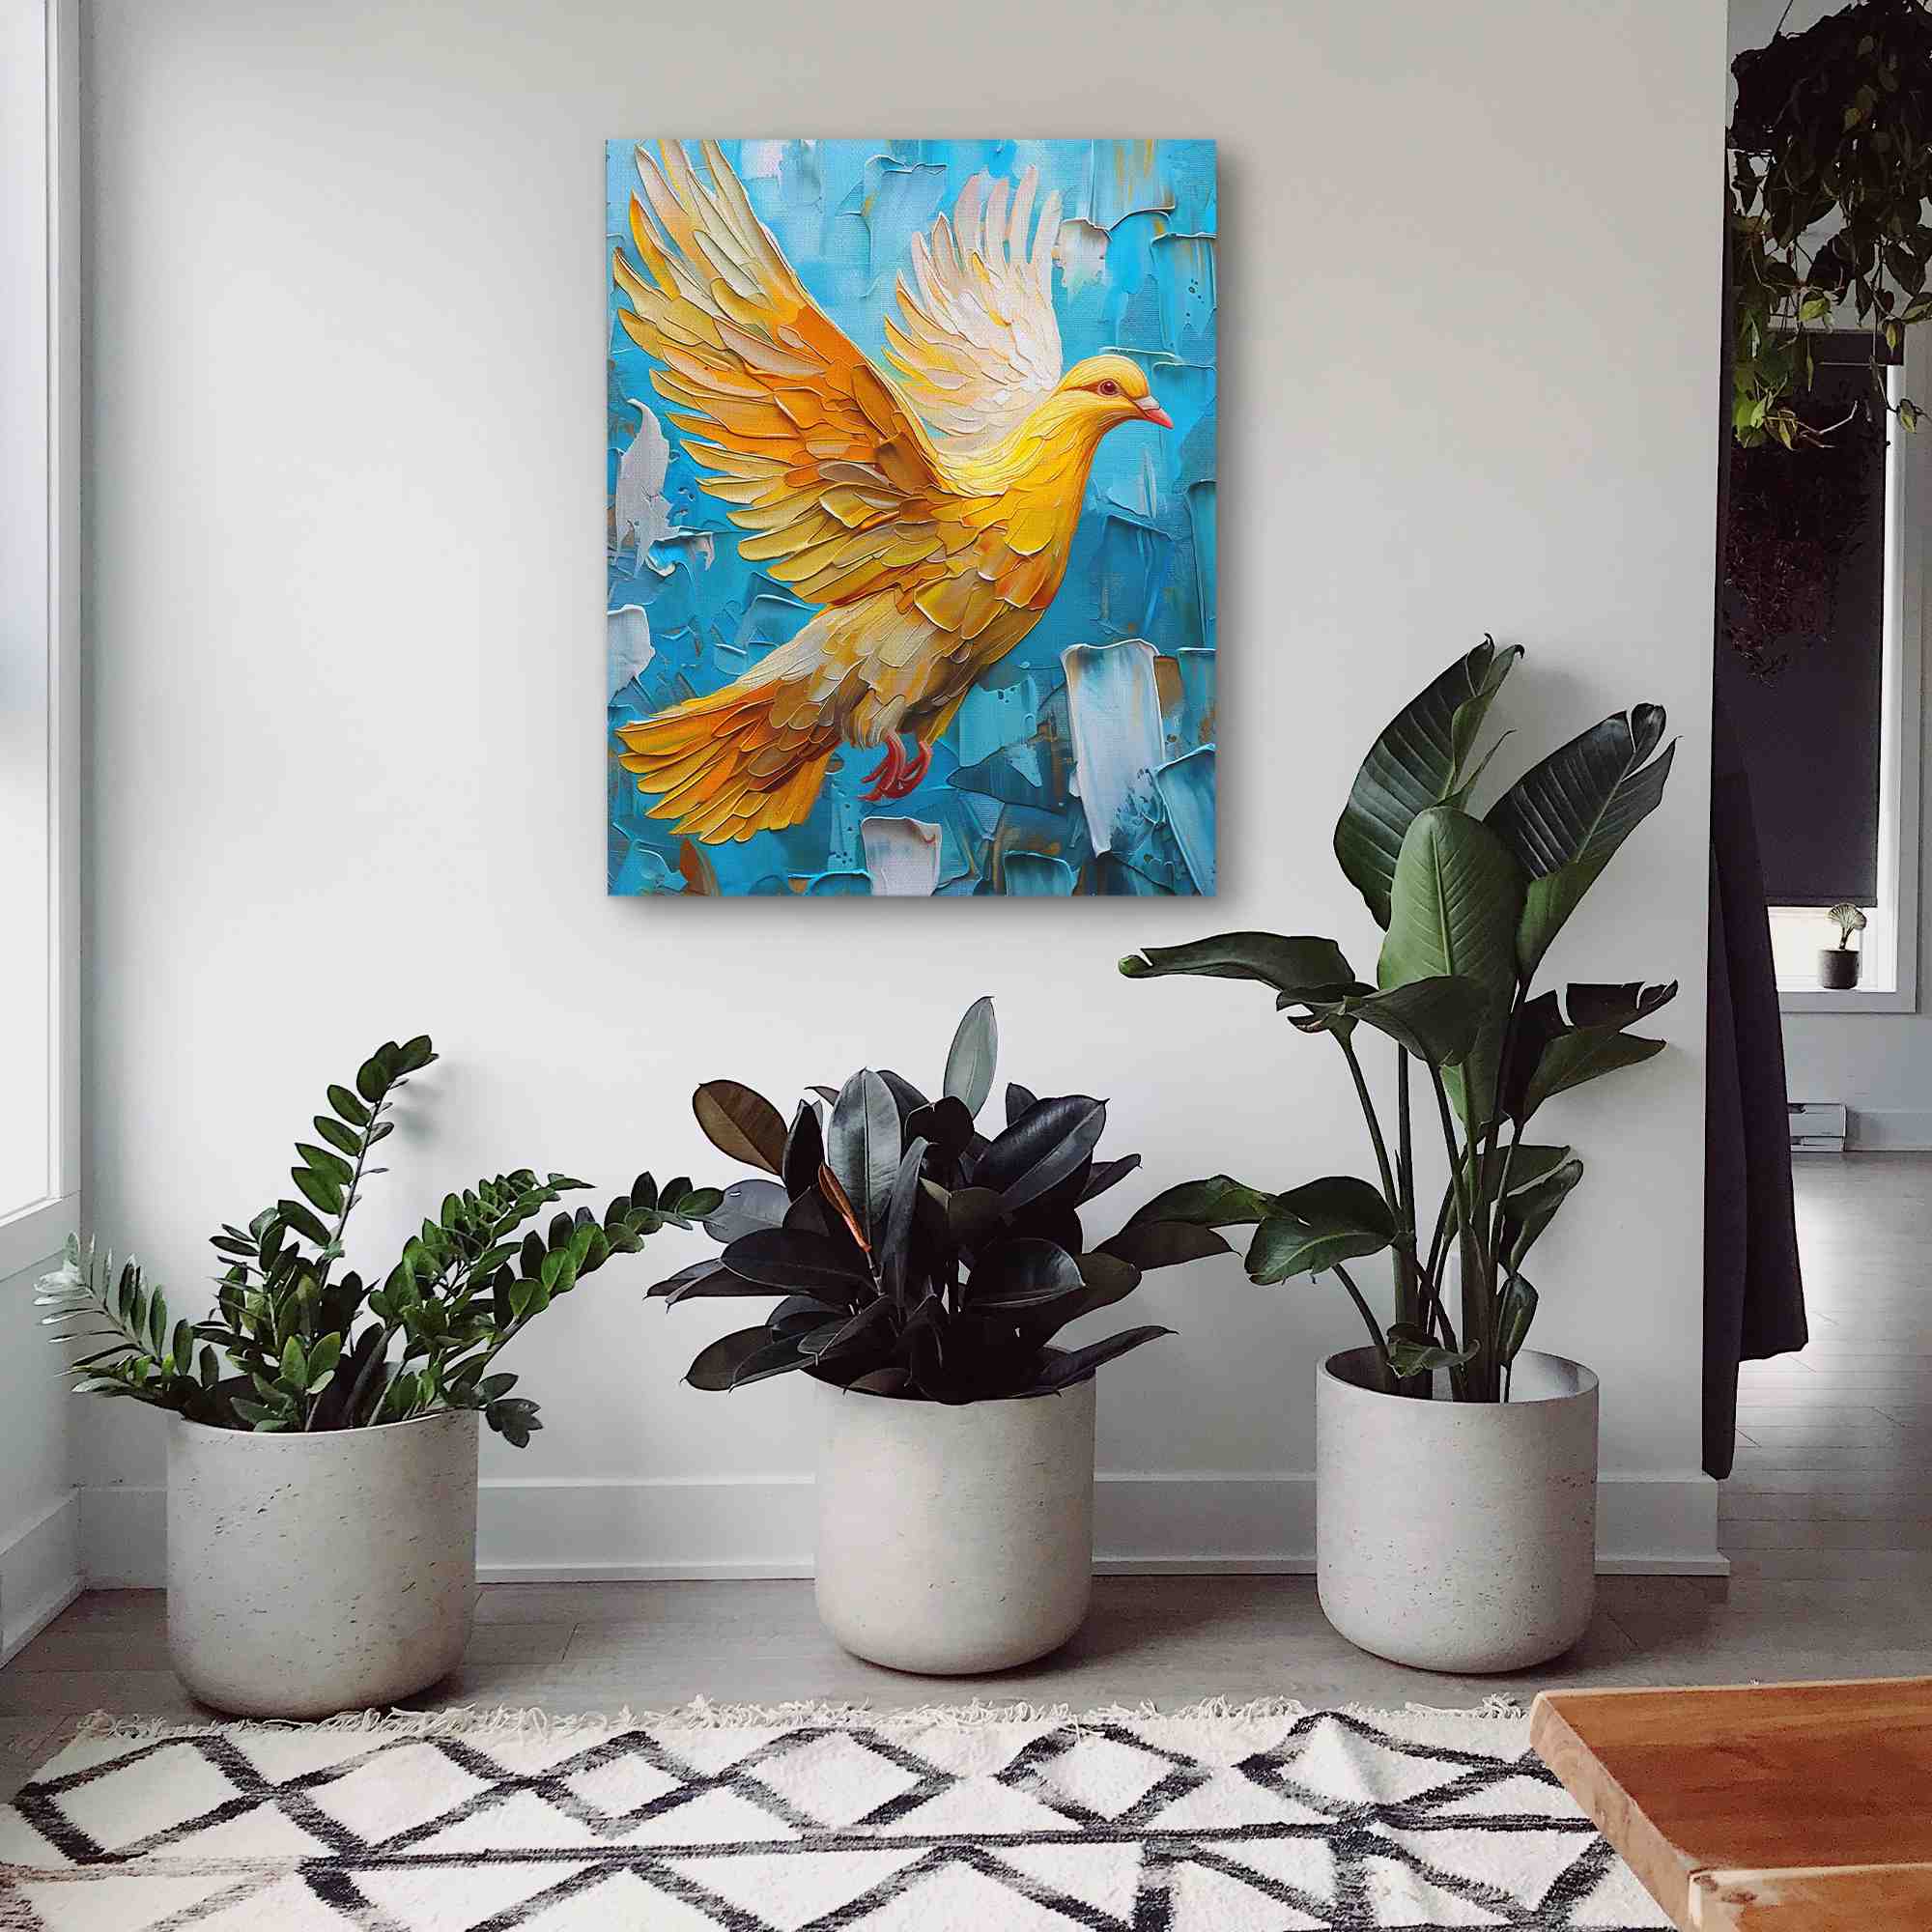 a painting of a yellow bird on a blue background